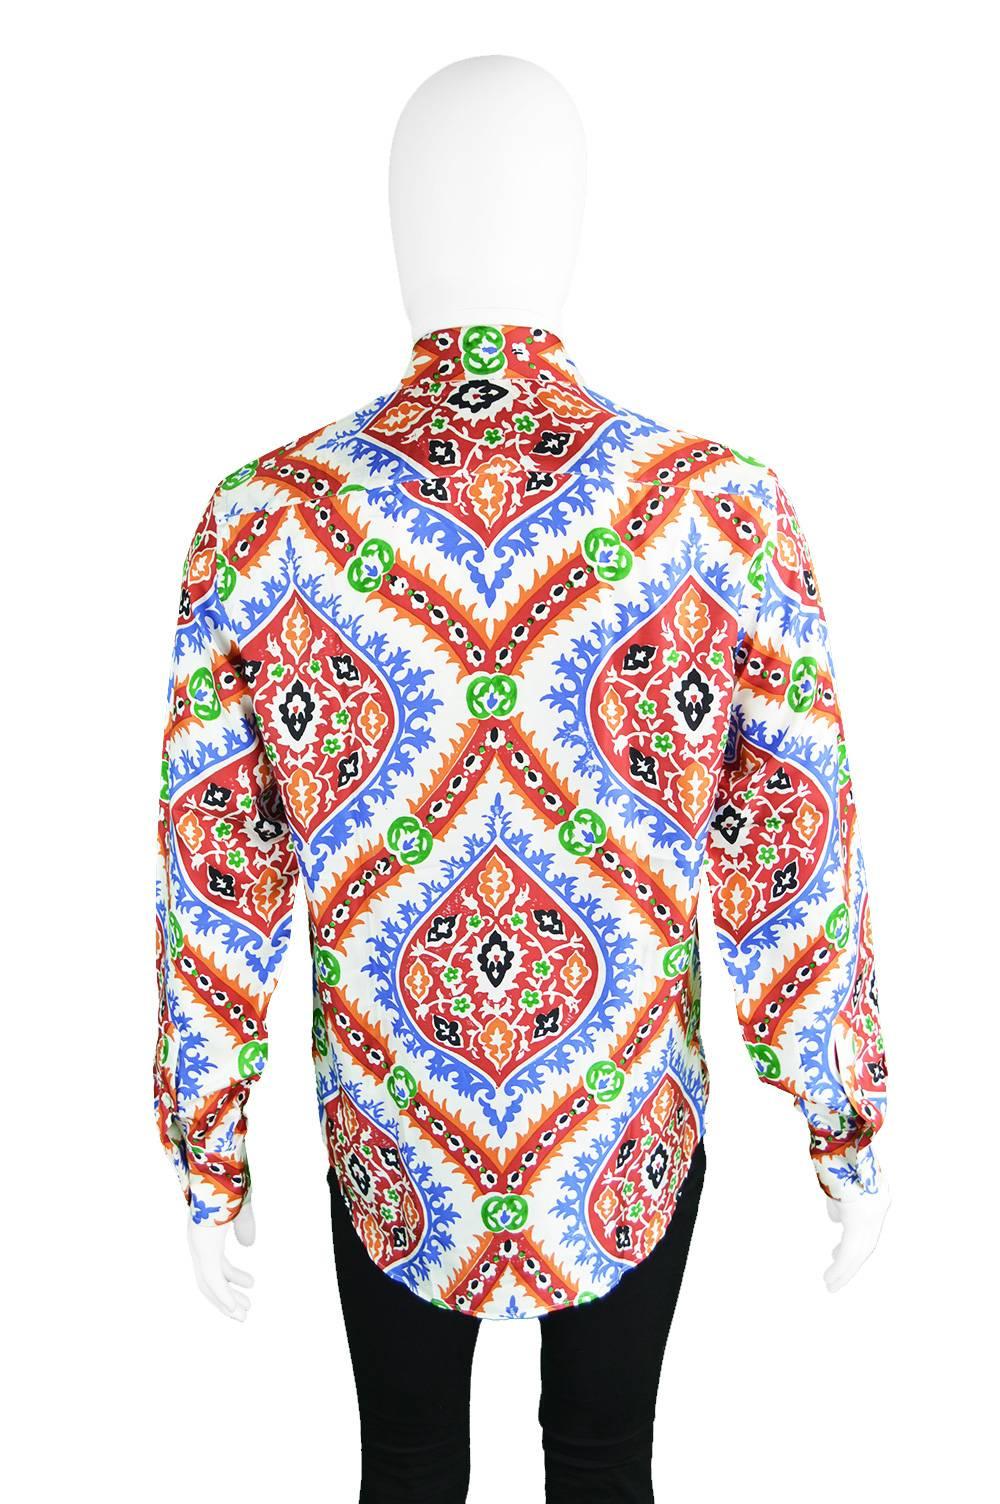 Prada Men's Silk Shirt with Holliday & Brown Collab Paisley Print, A/W 2003 In Excellent Condition For Sale In Doncaster, South Yorkshire